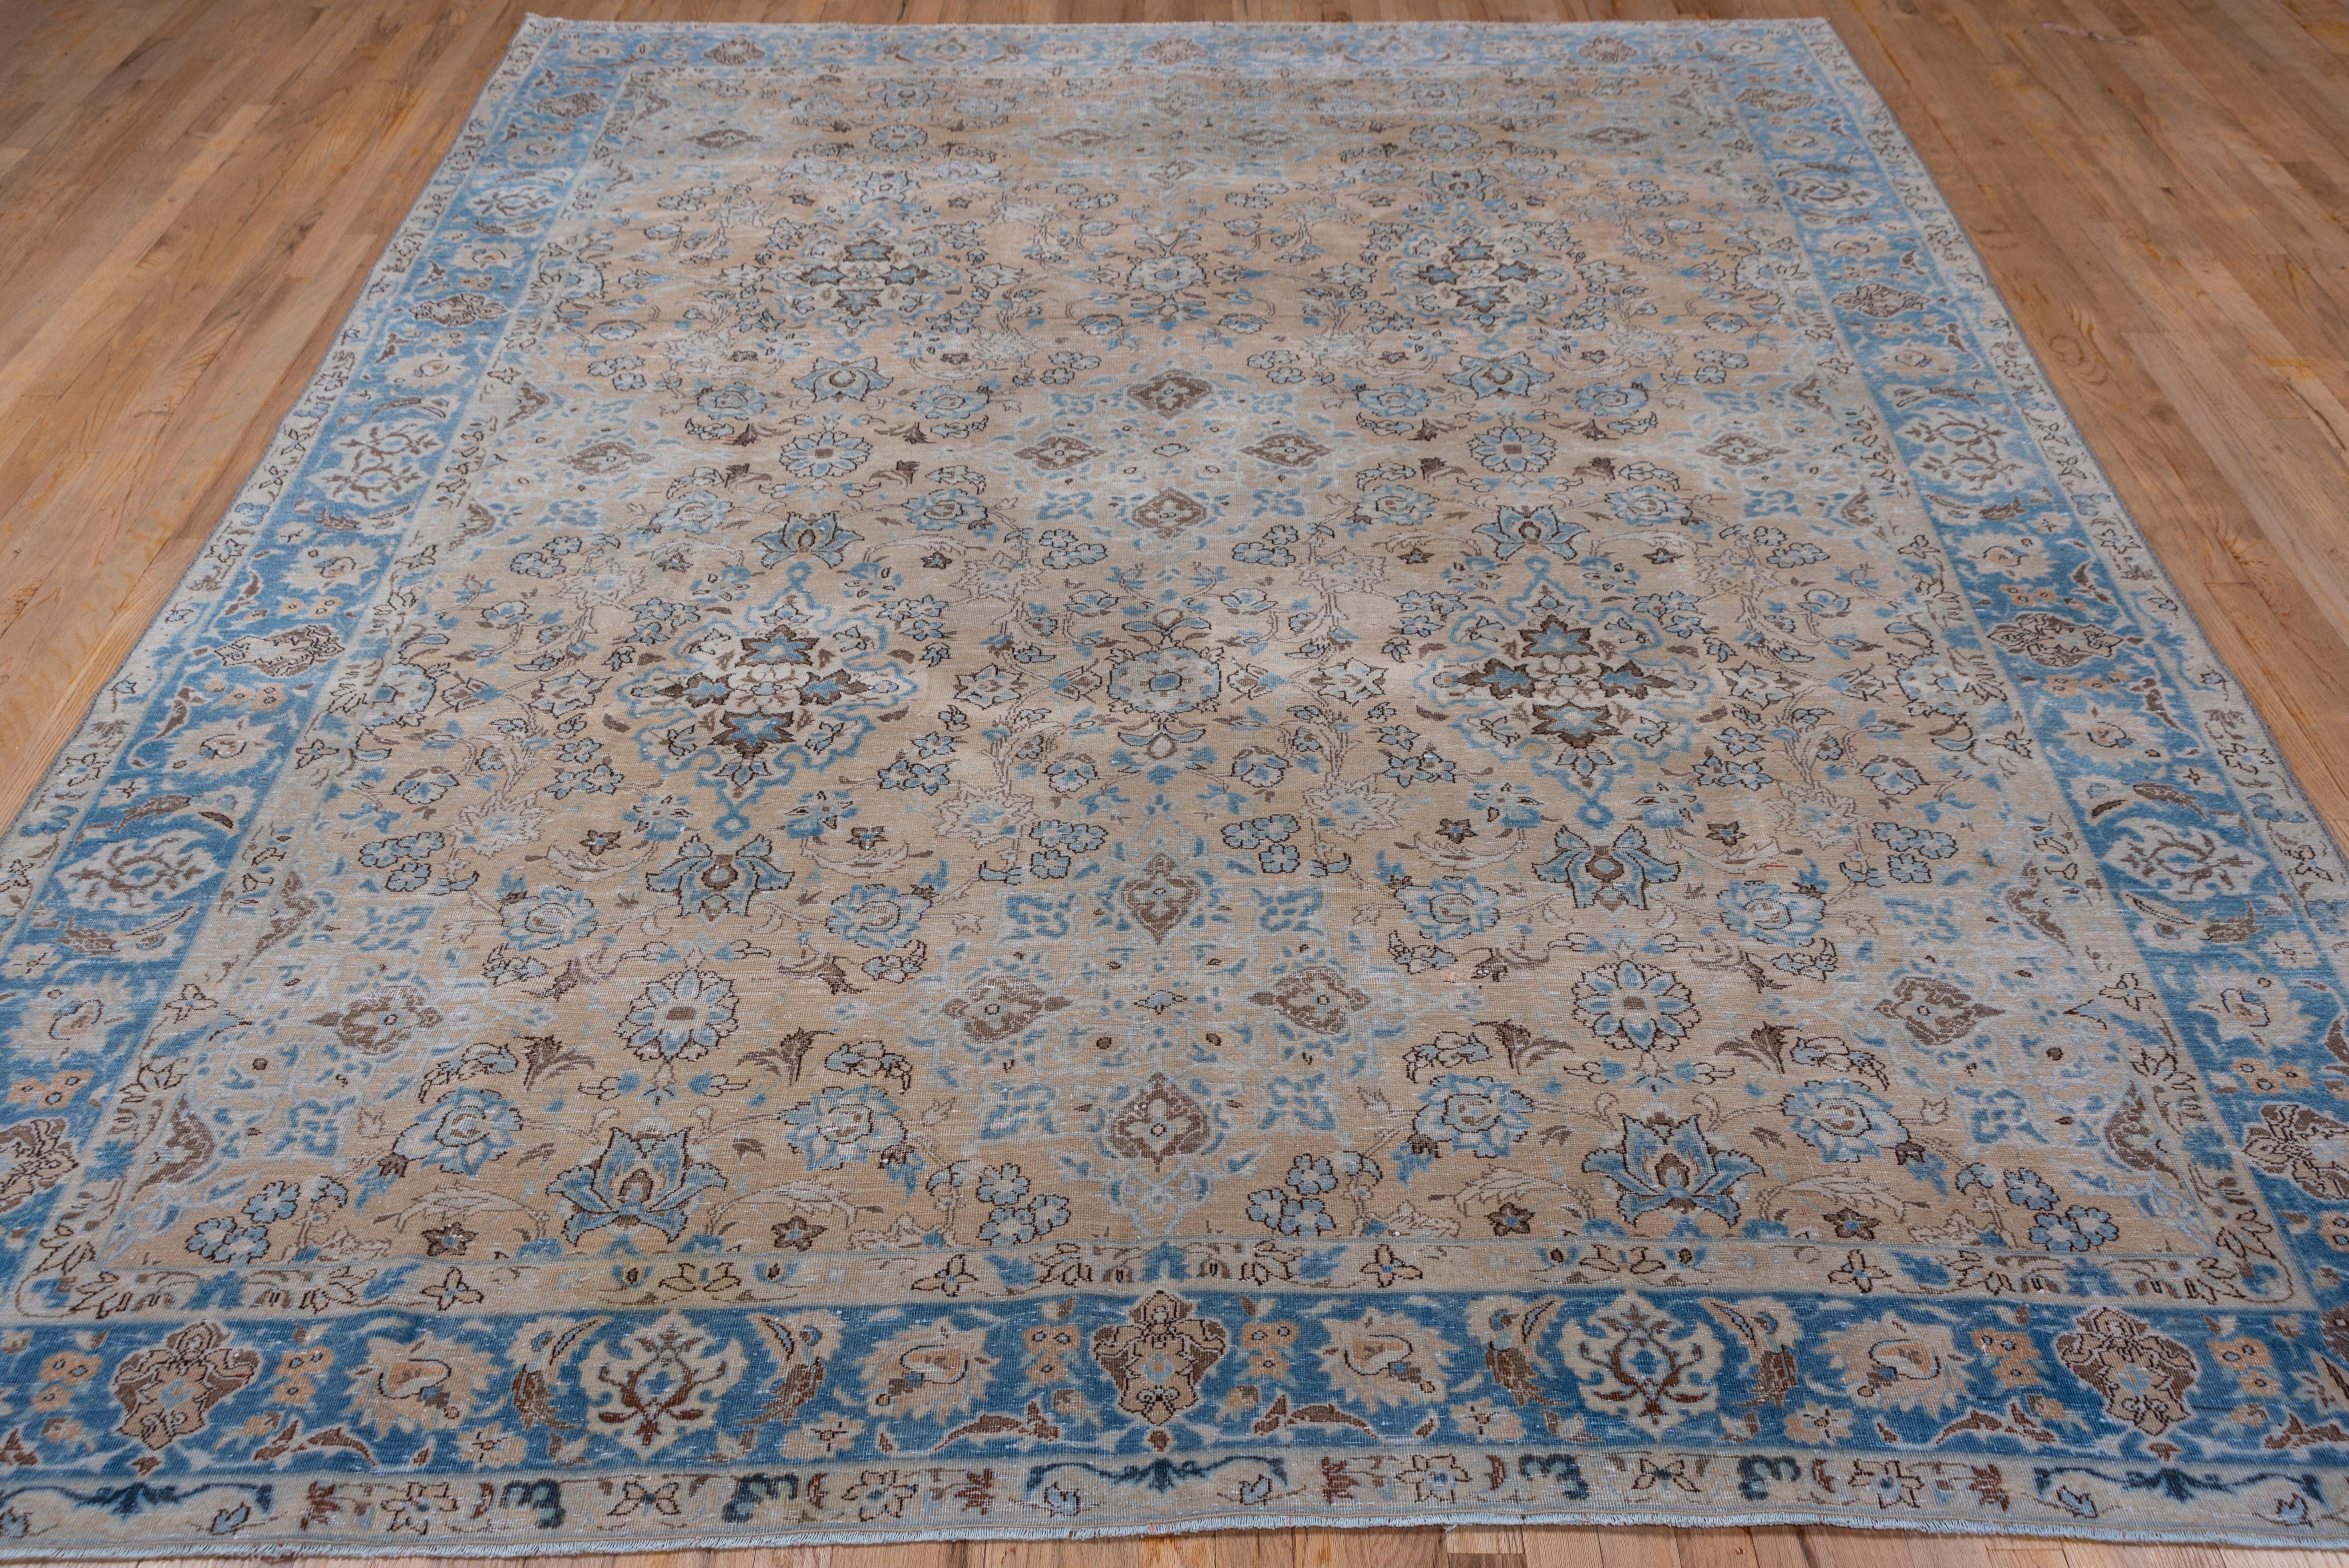 This urban NW Persian carpet features a sandy beige field with a close pattern of palmettes, flower quatrefoils and sinuous leafy vines, accented in powder blue, ivory and red-brown, and framed by a light blue palmette border.